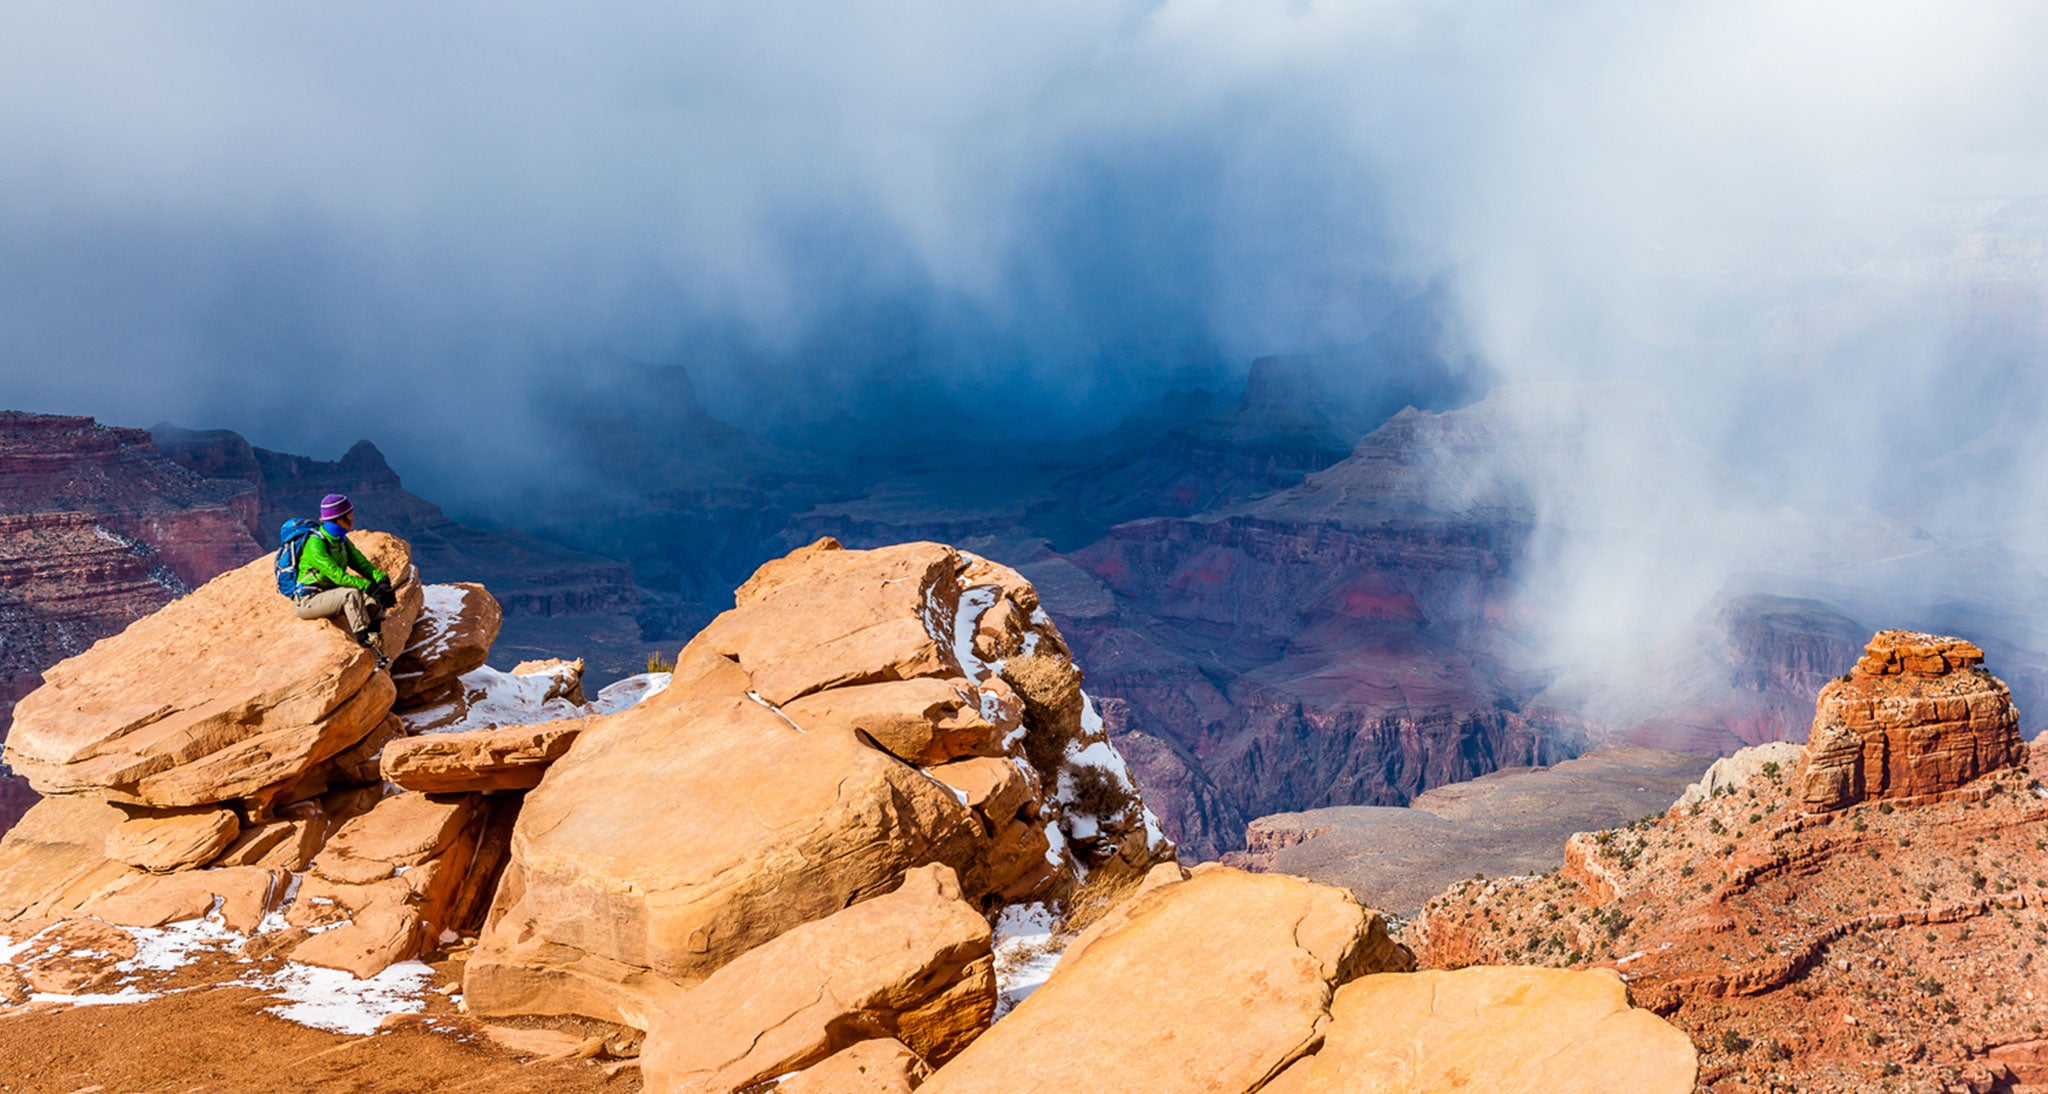 Cumulus clouds develop in the winter too as seen here over the Grand Canyon on the South Kaibab Trail.  This large cell is producing snowshoers seen by the white ragged shafts.  The cellular nature of the cloud base and the fact that snow started and stopped pretty abruptly several times that day is characteristic of cumulus clouds and showery precipitation.